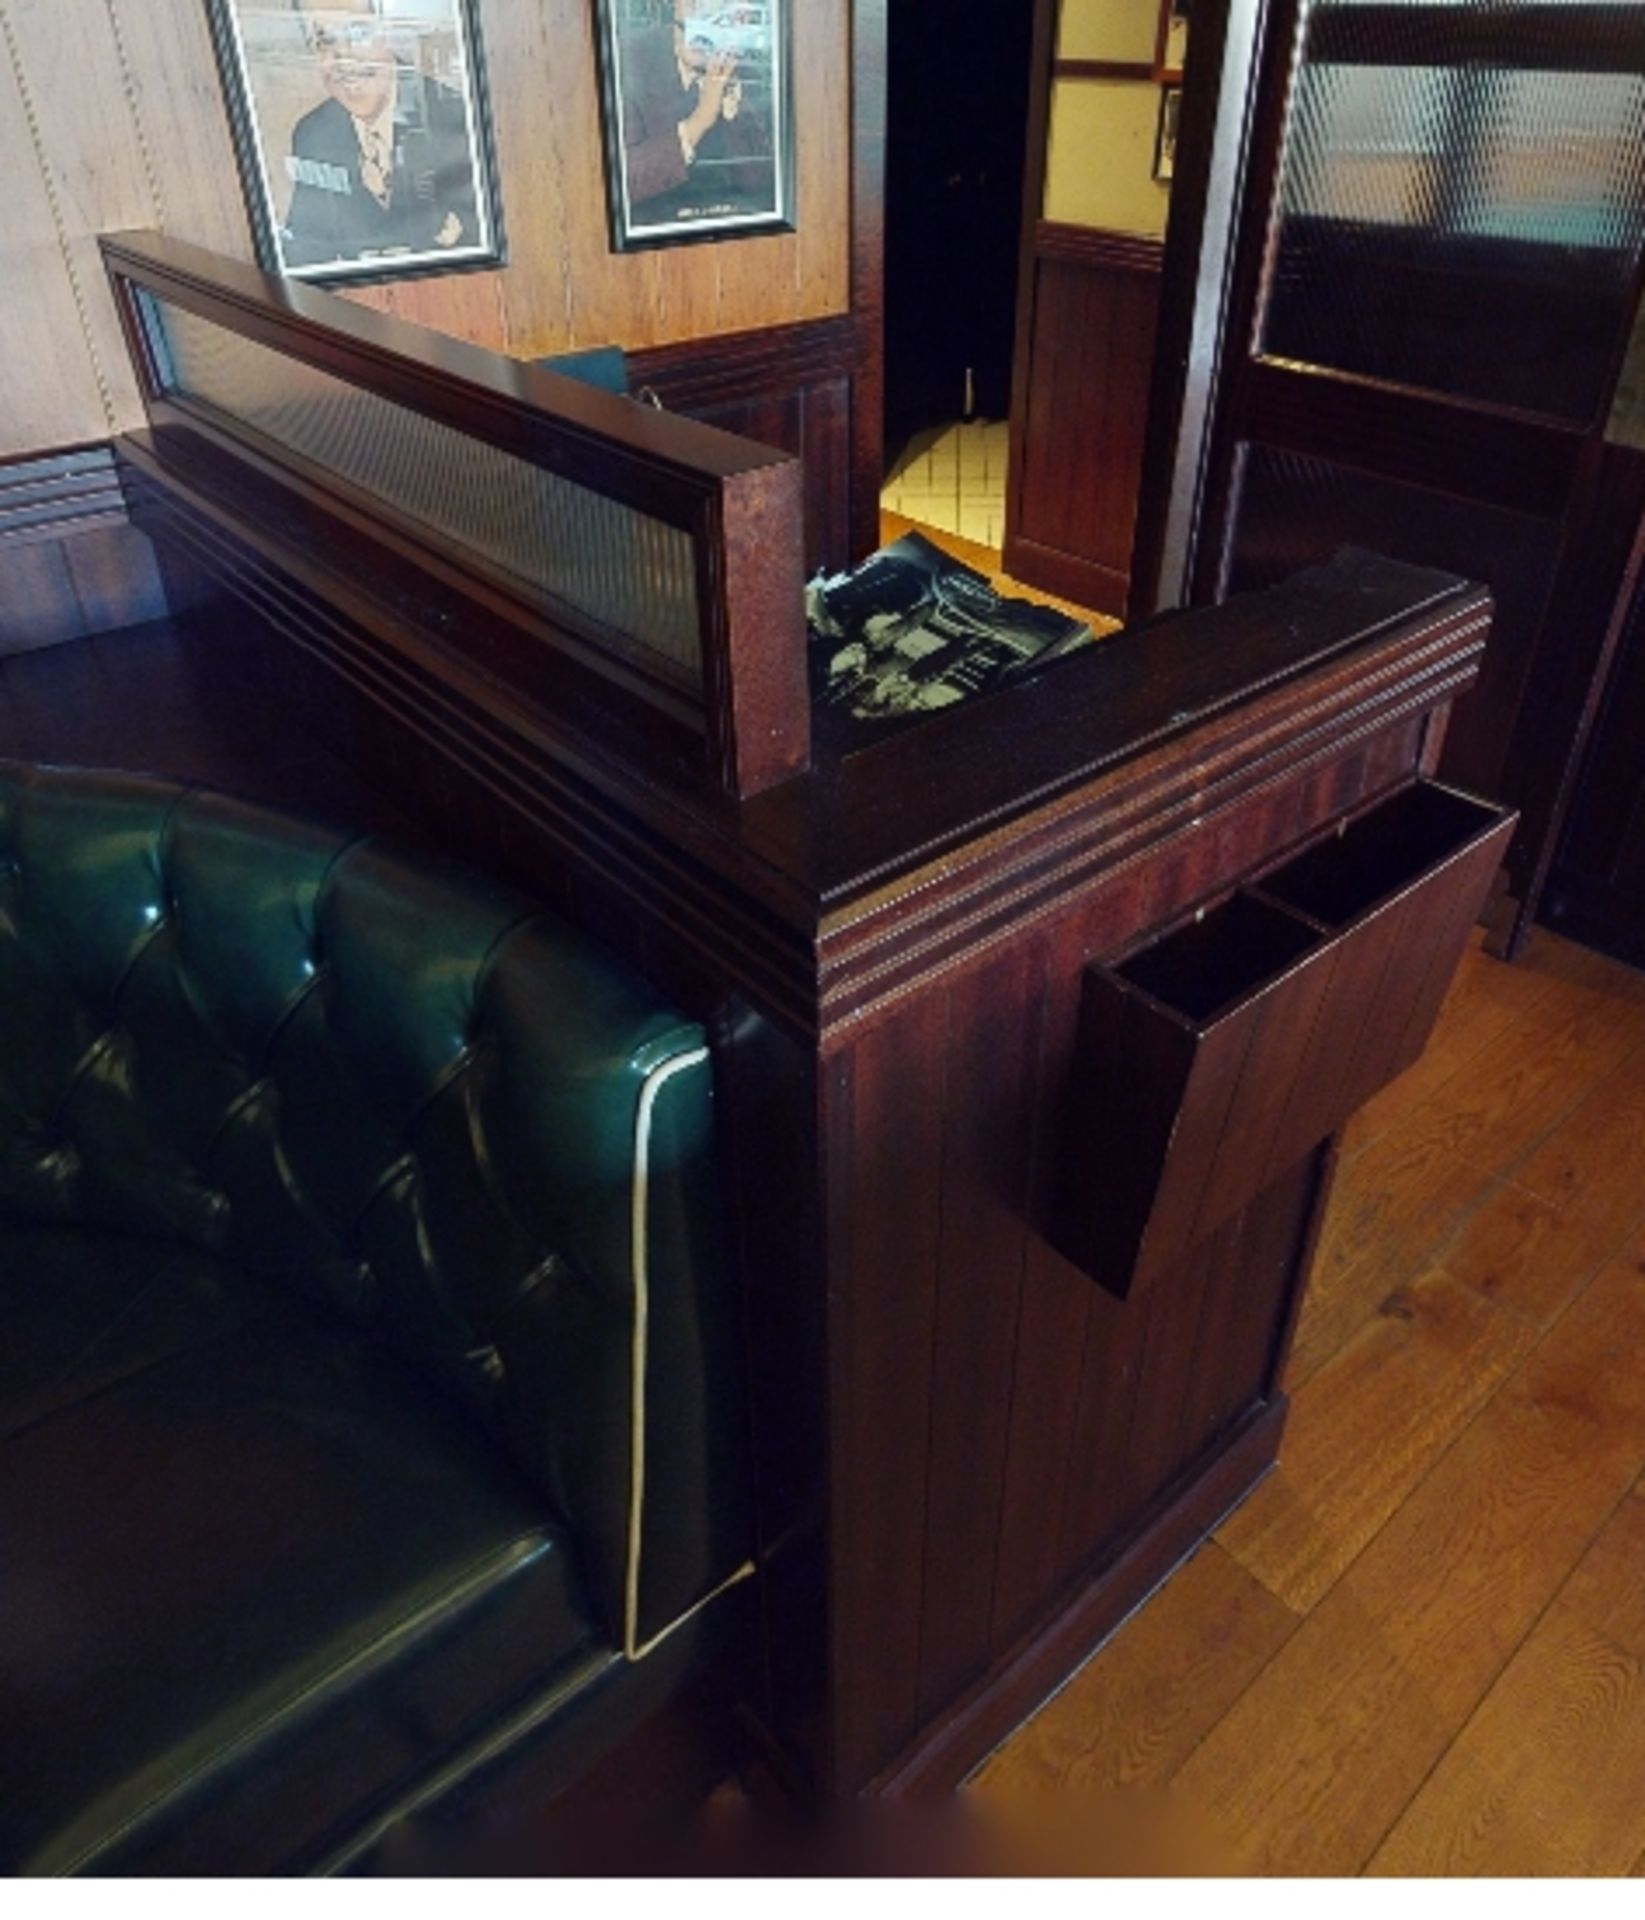 2 x Waiter Stations Featuring a Dark Wooden Finish, Menu Holders, Privacy Panels and Cupboards - - Image 6 of 8